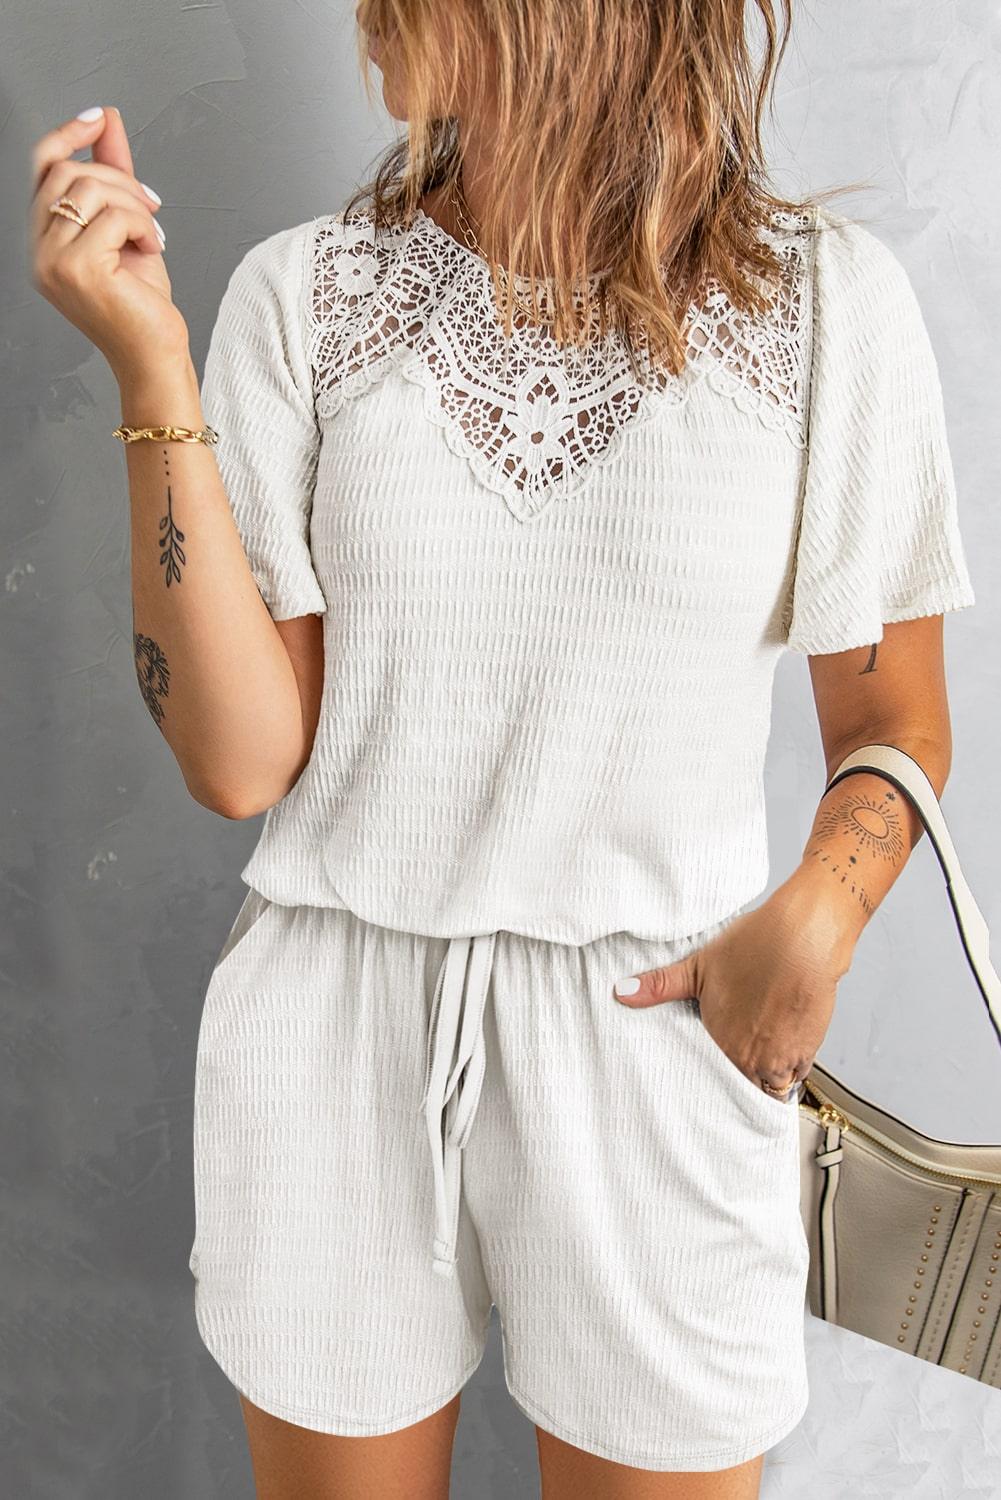 Spliced Lace Textured Round Neck Romper - Rico Goods by Rico Suarez